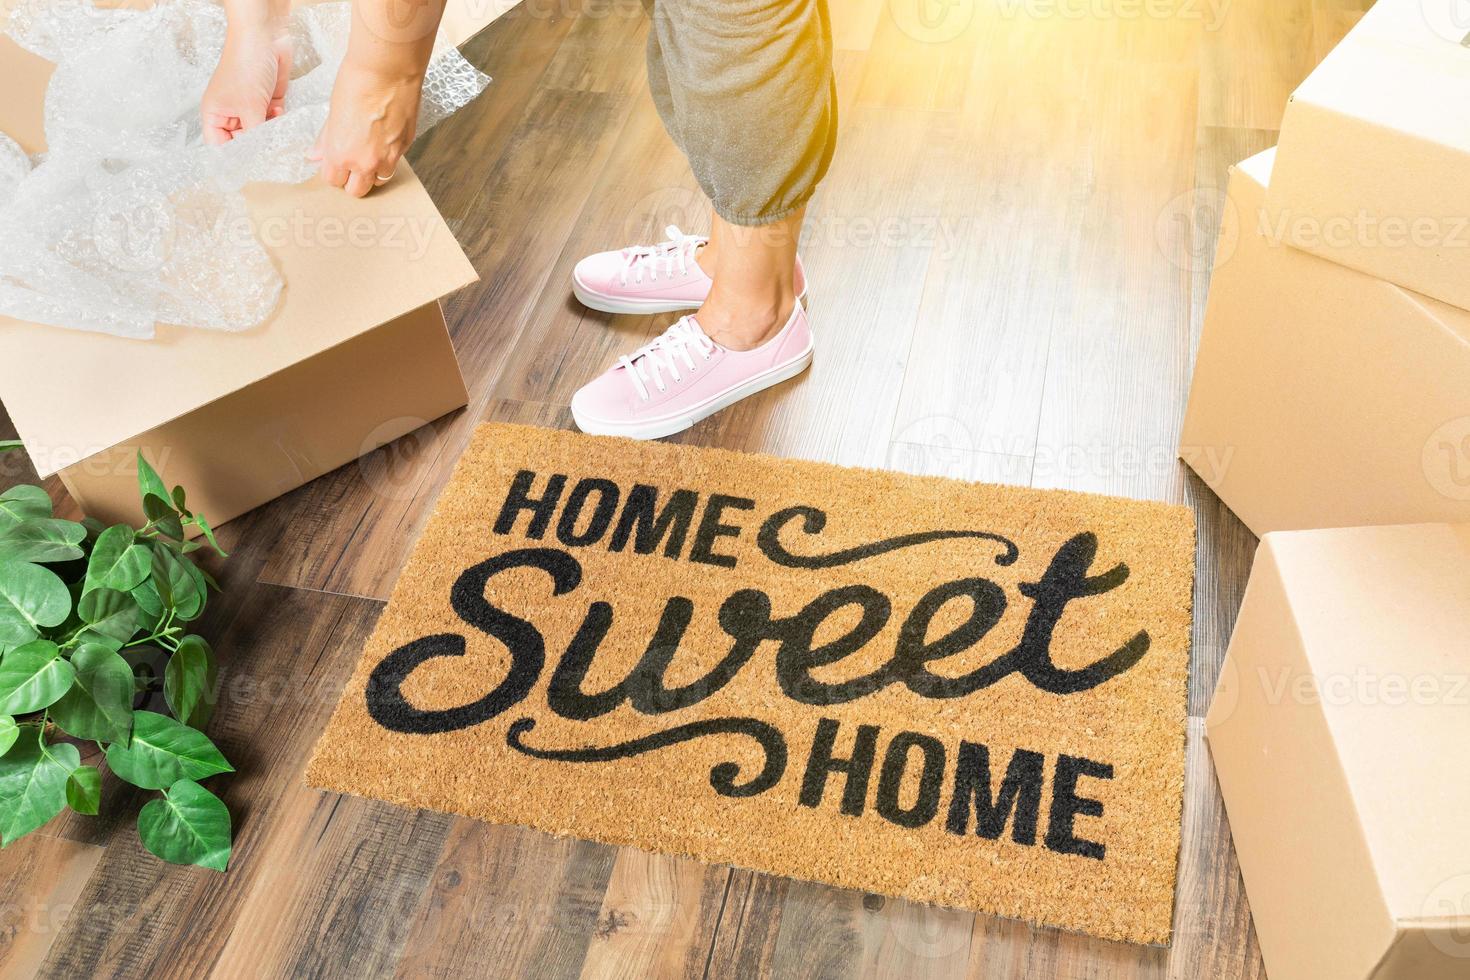 Woman in Pink Shoes and Sweats Unpacking Near Home Sweet Home Welcome Mat, Moving Boxes and Plant photo